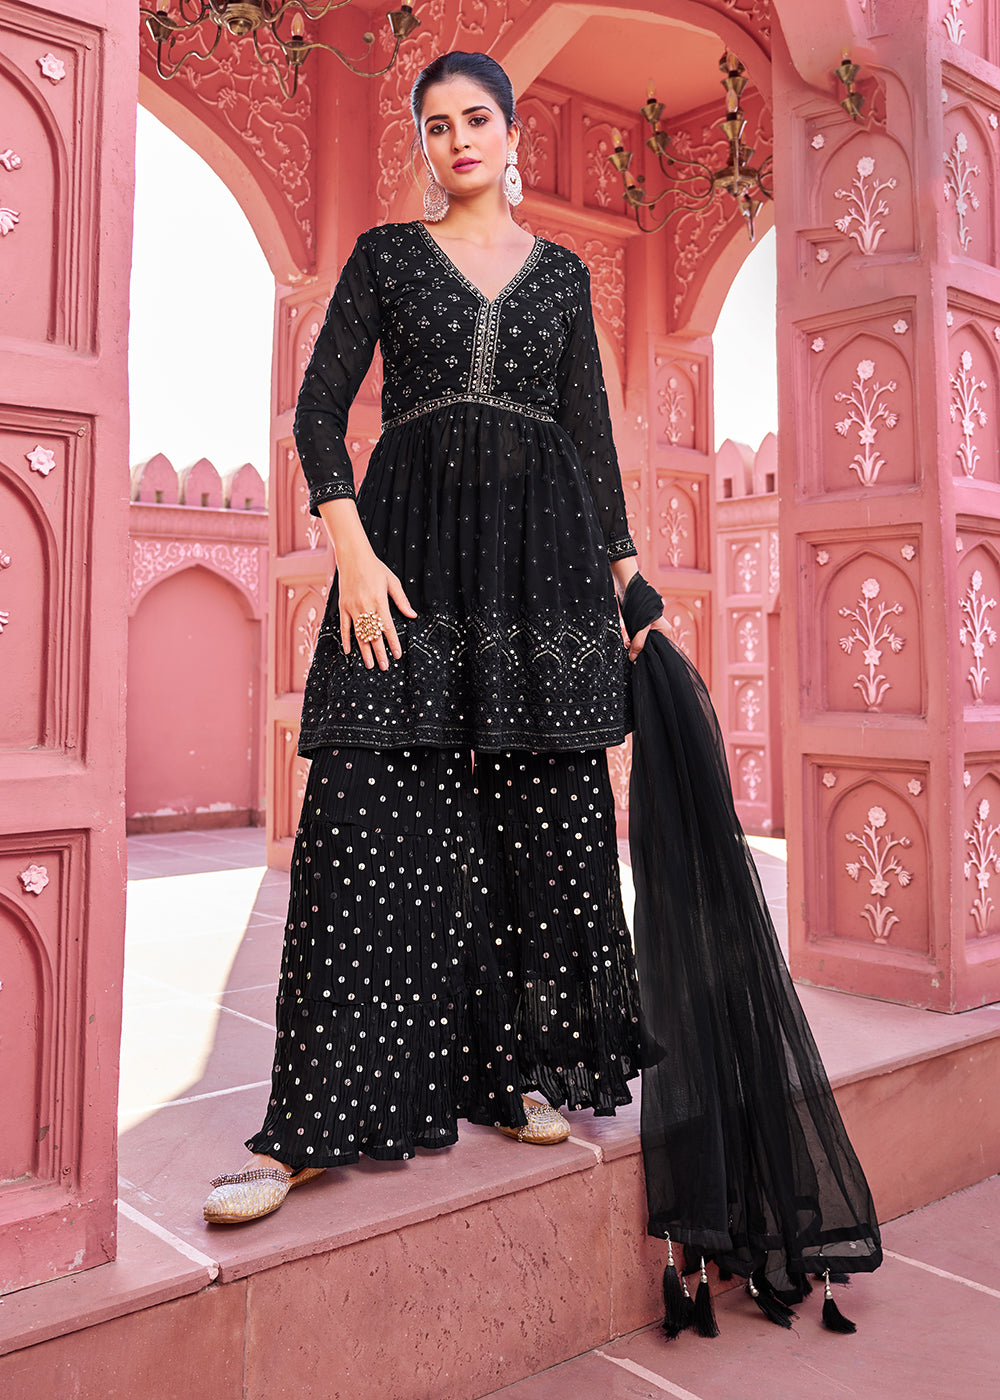 Buy Now Majestic Black Embroidered Eid Style Palazzo Suit Online in USA, UK, Canada, Germany, Australia & Worldwide at Empress Clothing. 